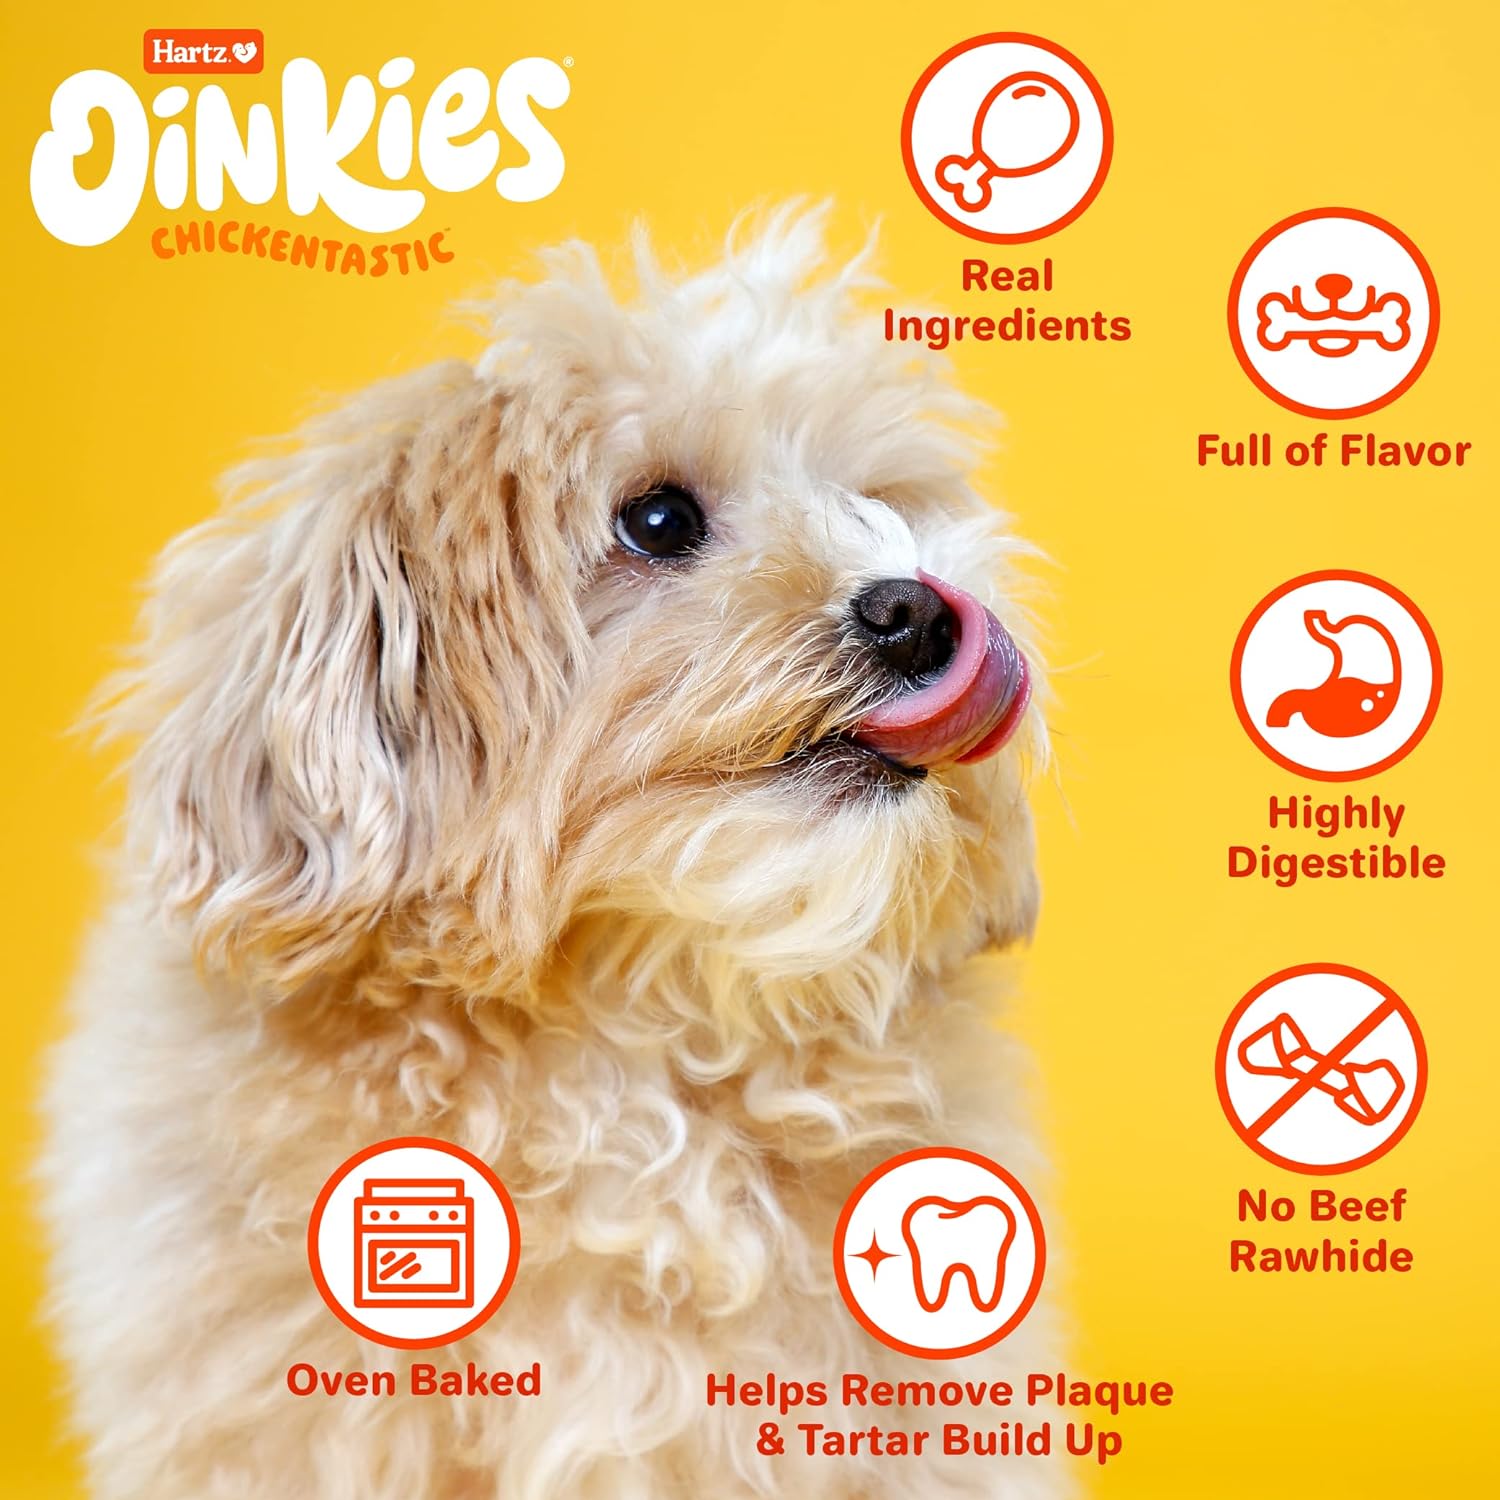 Hartz Oinkies Rawhide-Free Tender Treats Wrapped with Chicken Dog Treats Chews, 18 Count, Highly Digestible, No Artificial Flavors, Perfect for Smaller and Senior Dogs(Packaging May vary) : Pet Supplies